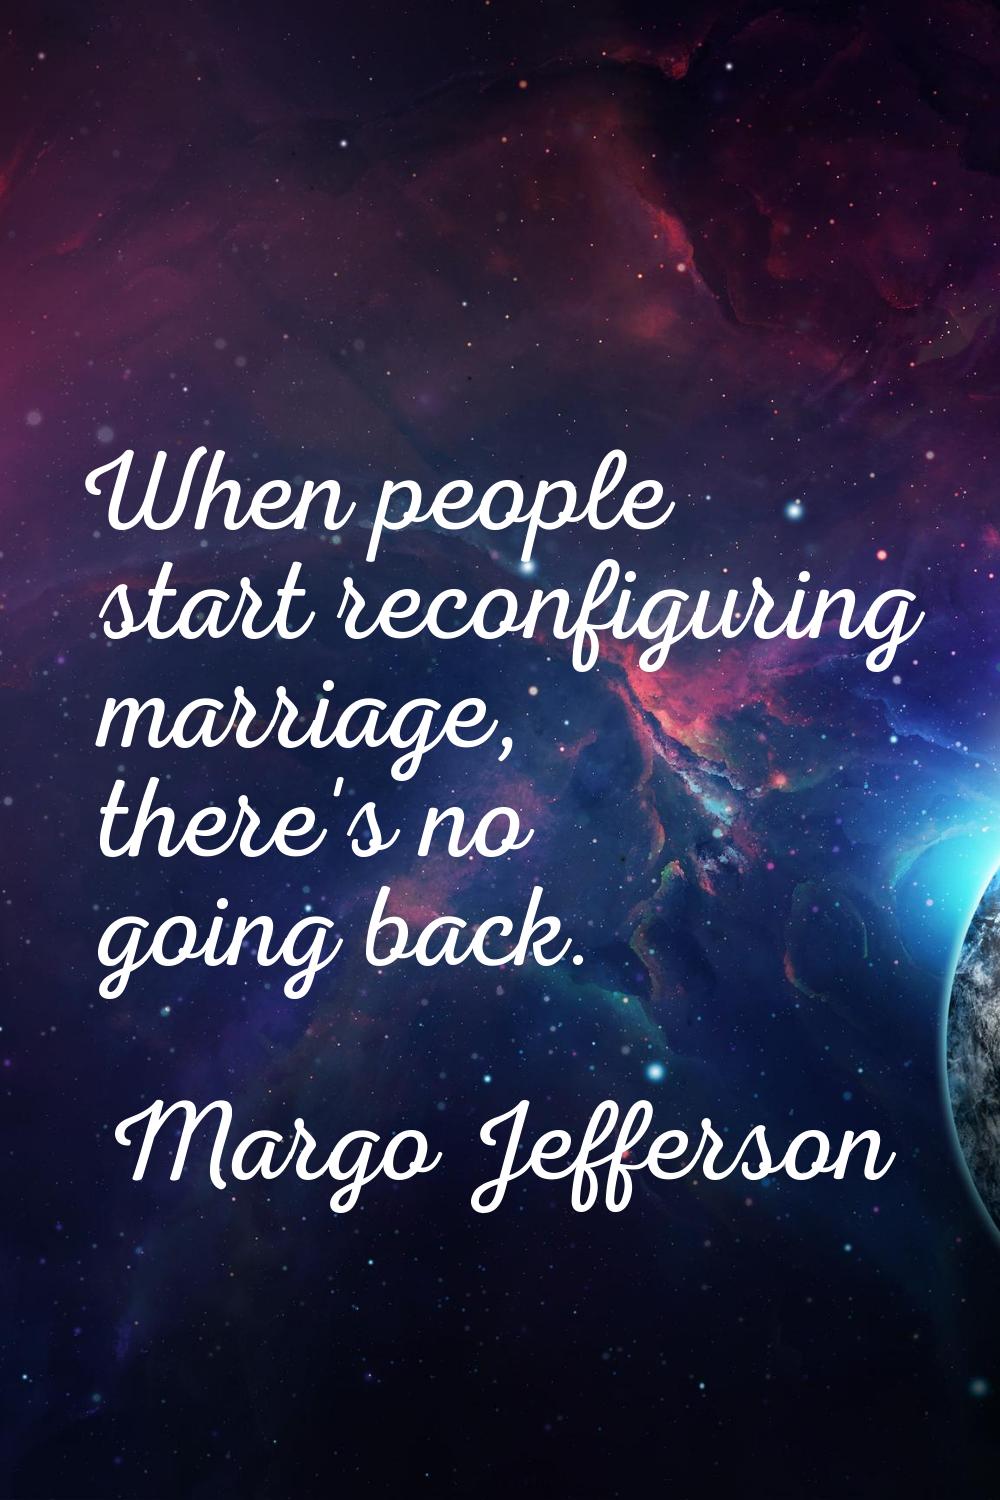 When people start reconfiguring marriage, there's no going back.